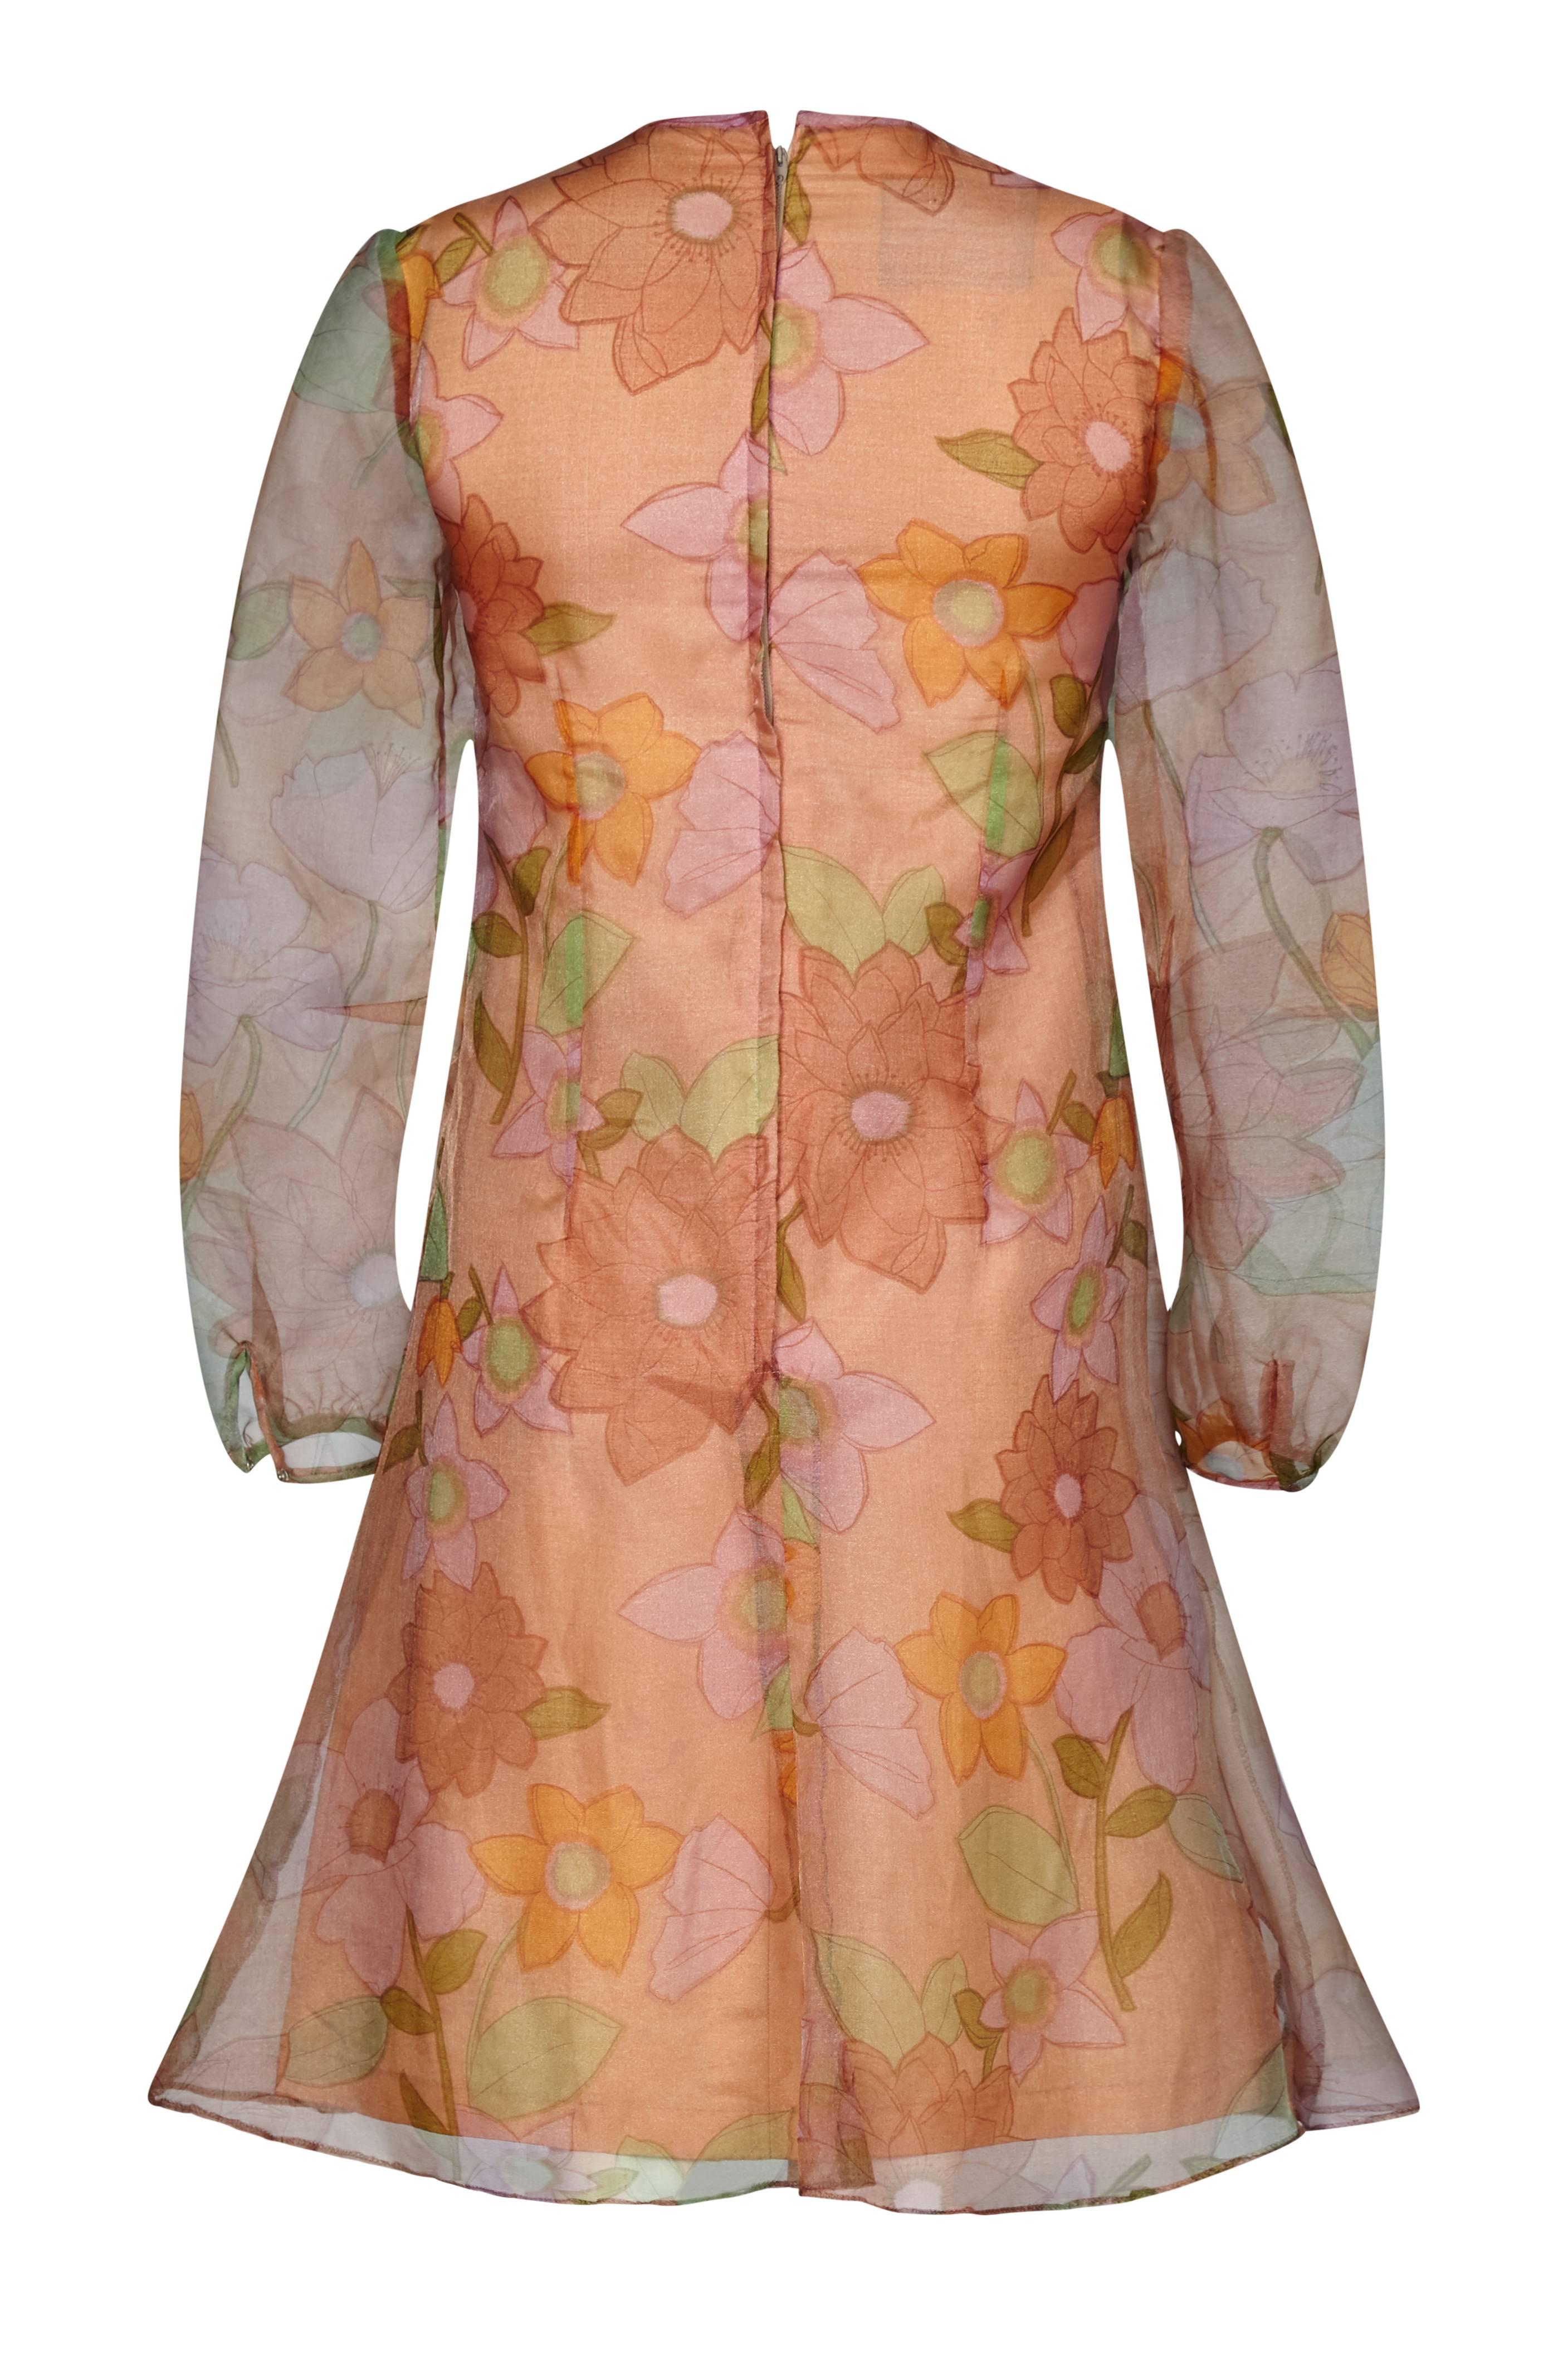 This pretty 1960s Simon Massey nylon organza floral print dress perfectly epitomises the style and feel of the London boutique scene. The designer has chosen a bold graphic floral print softened by warm, subtle tones in peach, soft lilac, amber,